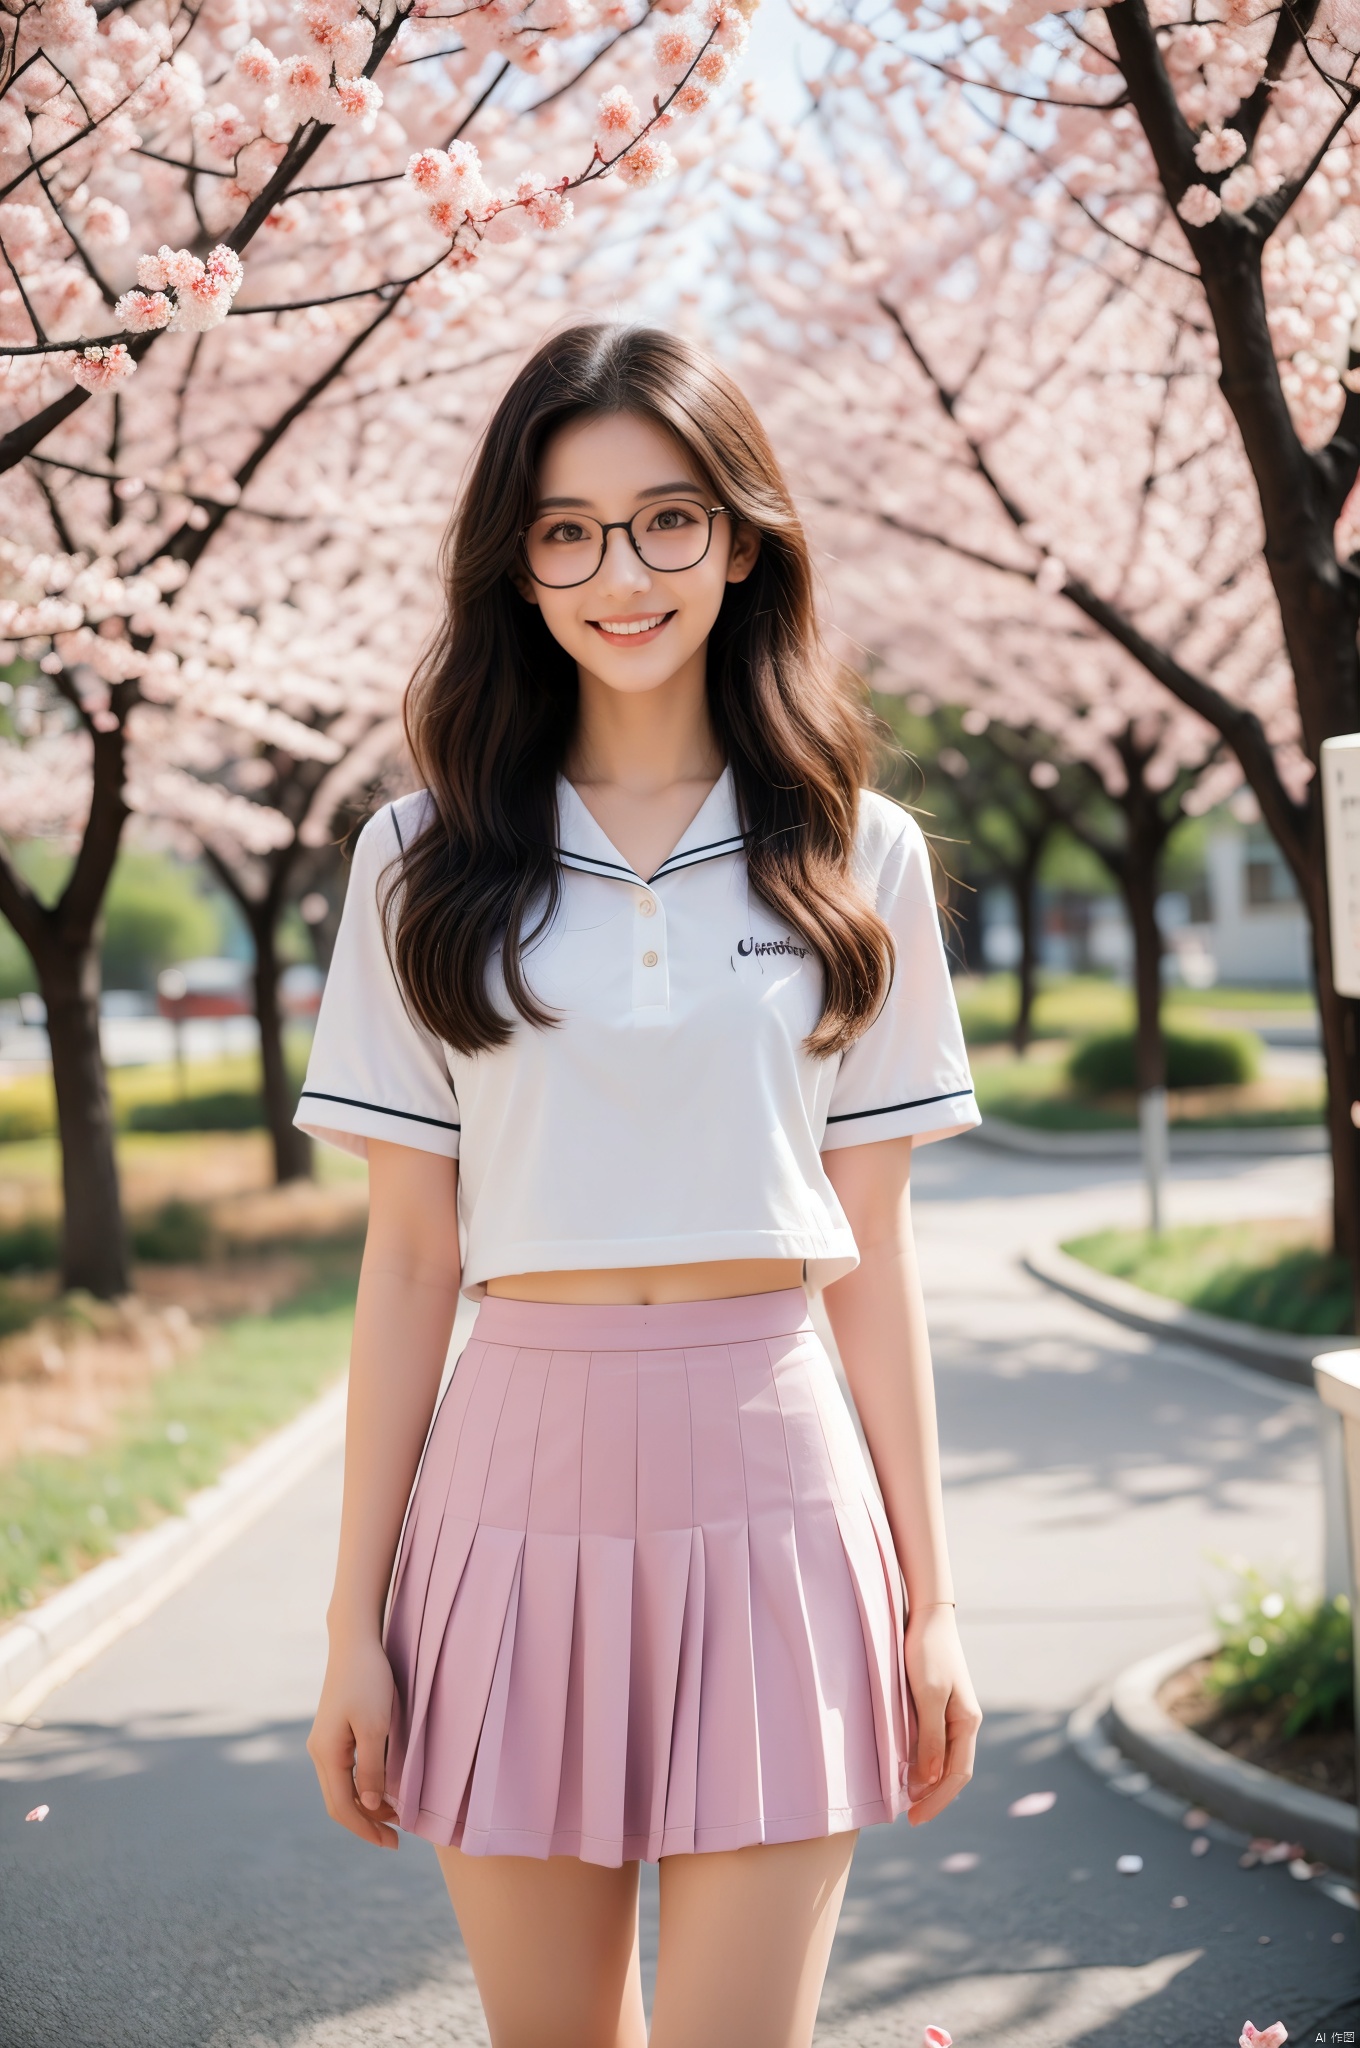 A Japanese schoolgirl wearing a JK uniform with short black hair, glasses, and a backpack, standing on a school road filled with cherry blossoms, surrounded by falling cherry blossom petals, the sunlight shining on her smiling face, looking very cute and youthful, full shot body photo of the most beautiful artwork in the world featuring JK girl with glasses standing in a school road full of cherry blossoms, smiling, youthful, black short hair, white and black uniform, nostalgia, heart professional majestic oil painting by Ed Blinkey, Atey Ghailan, Studio Ghibli, by Jeremy Mann, Greg Manchess, Antonio Moro, trending on ArtStation, trending on CGSociety, Intricate, High Detail, Sharp focus, dramatic, photorealistic painting art by midjourney and greg rutkowski.